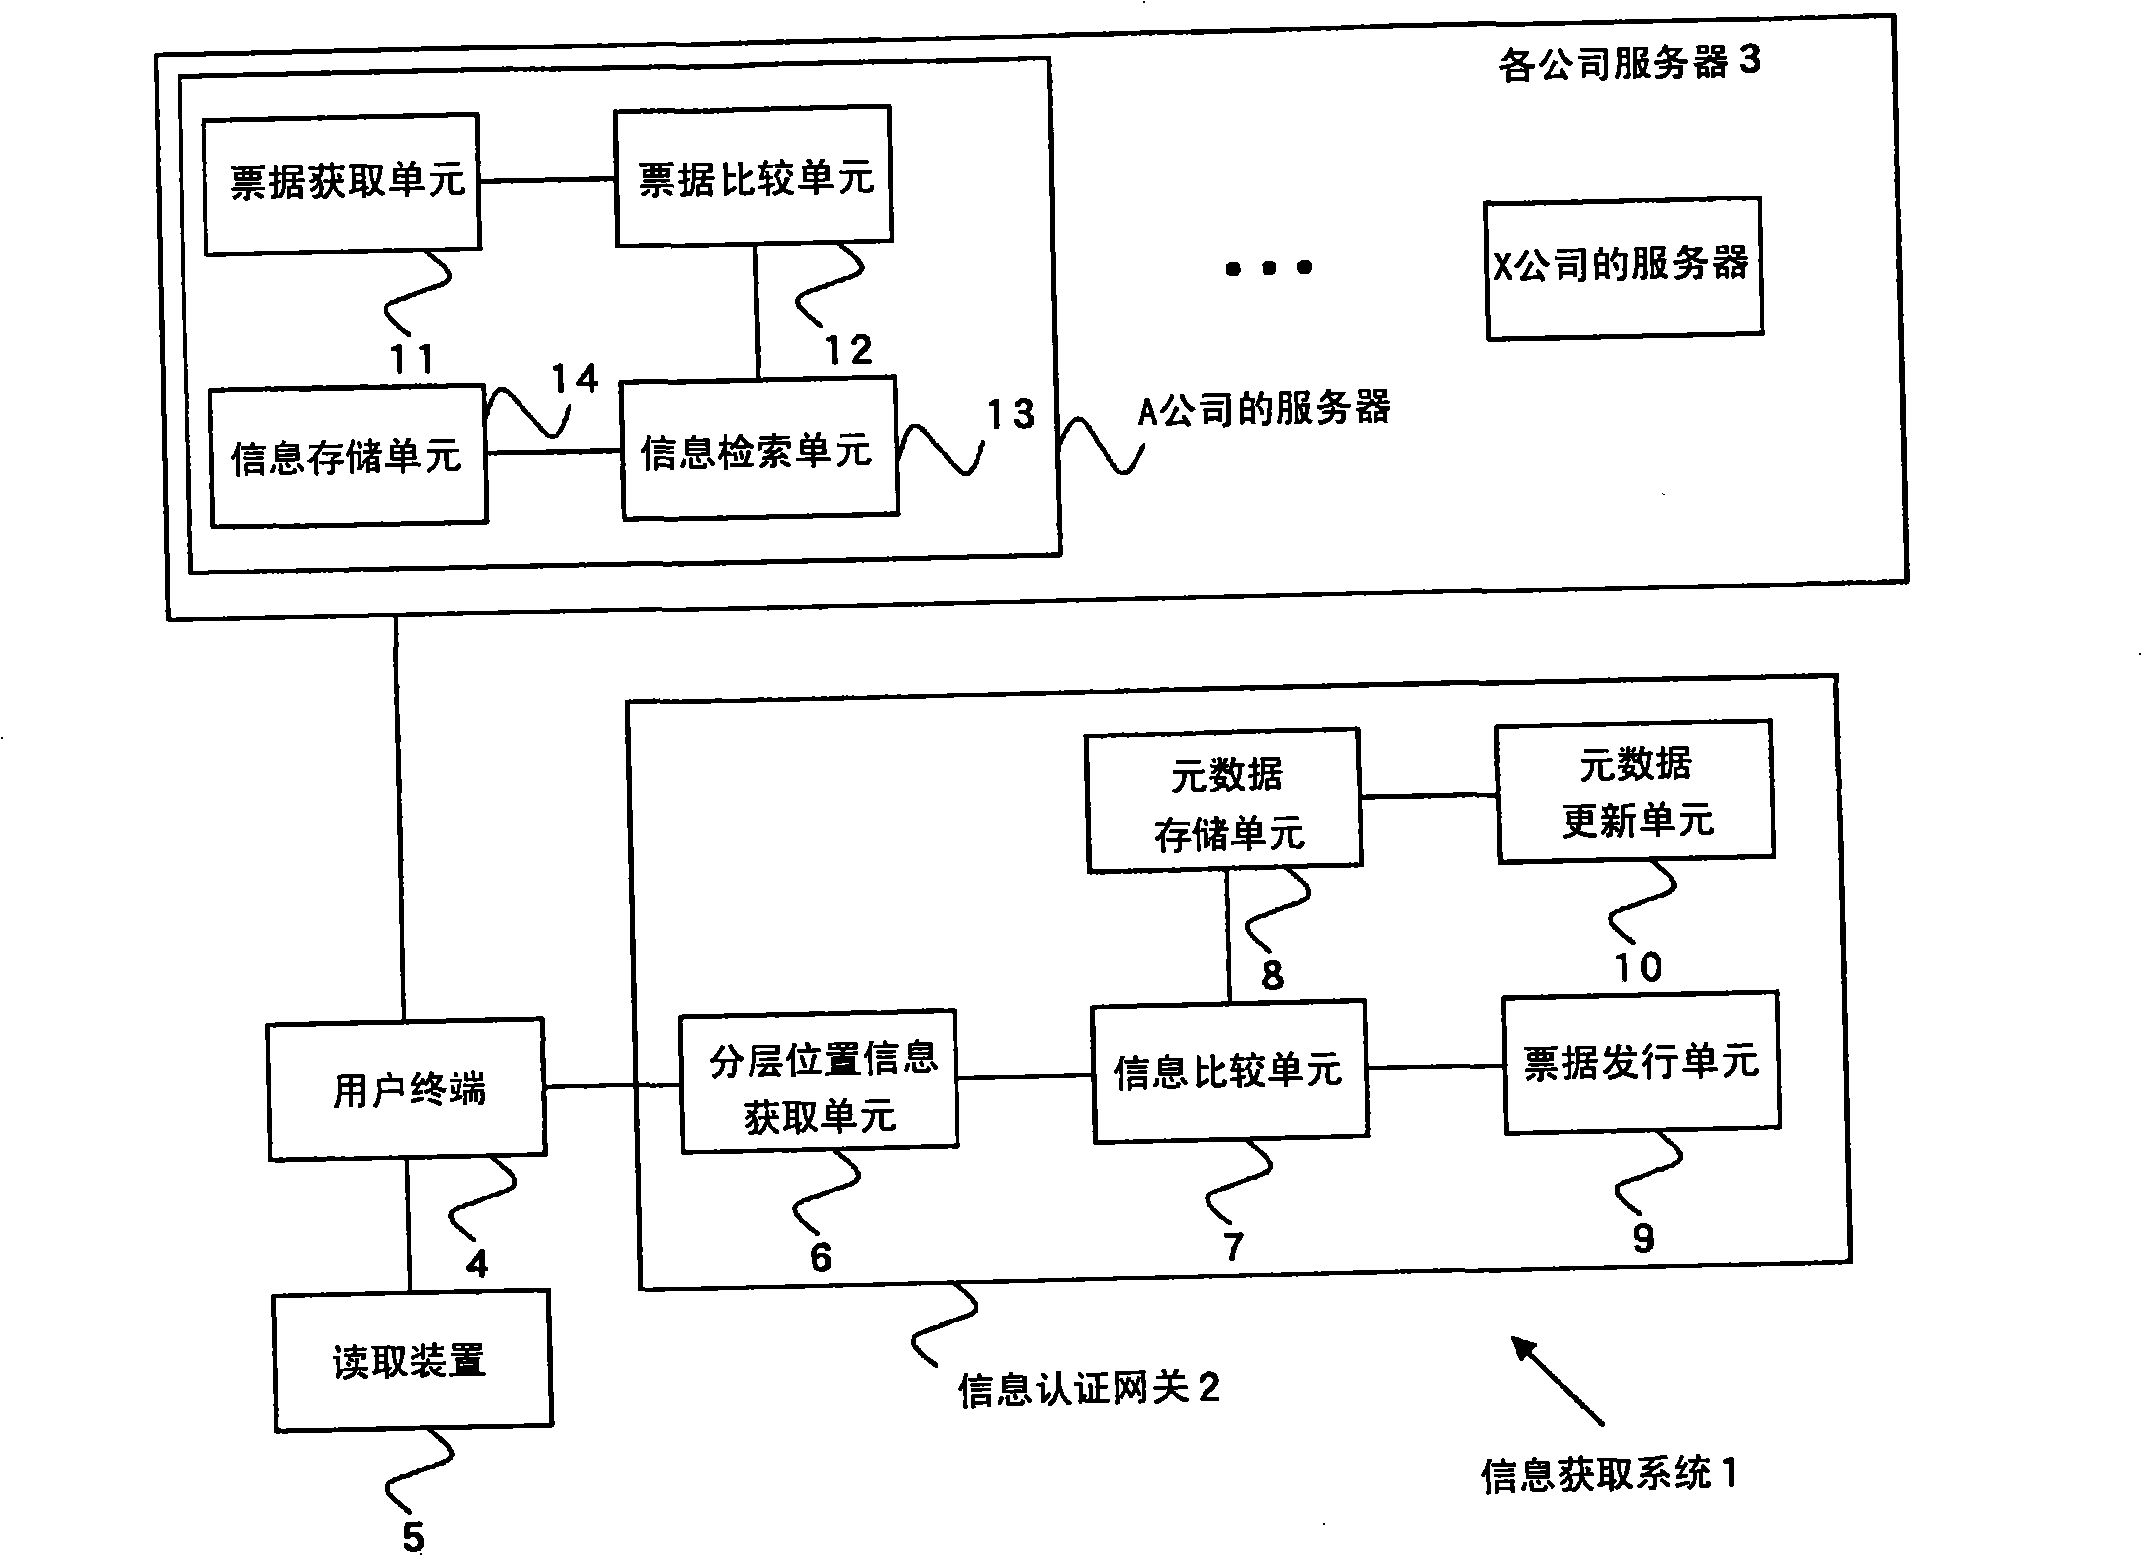 Information authentication gateway, information acquisition system and method using the same